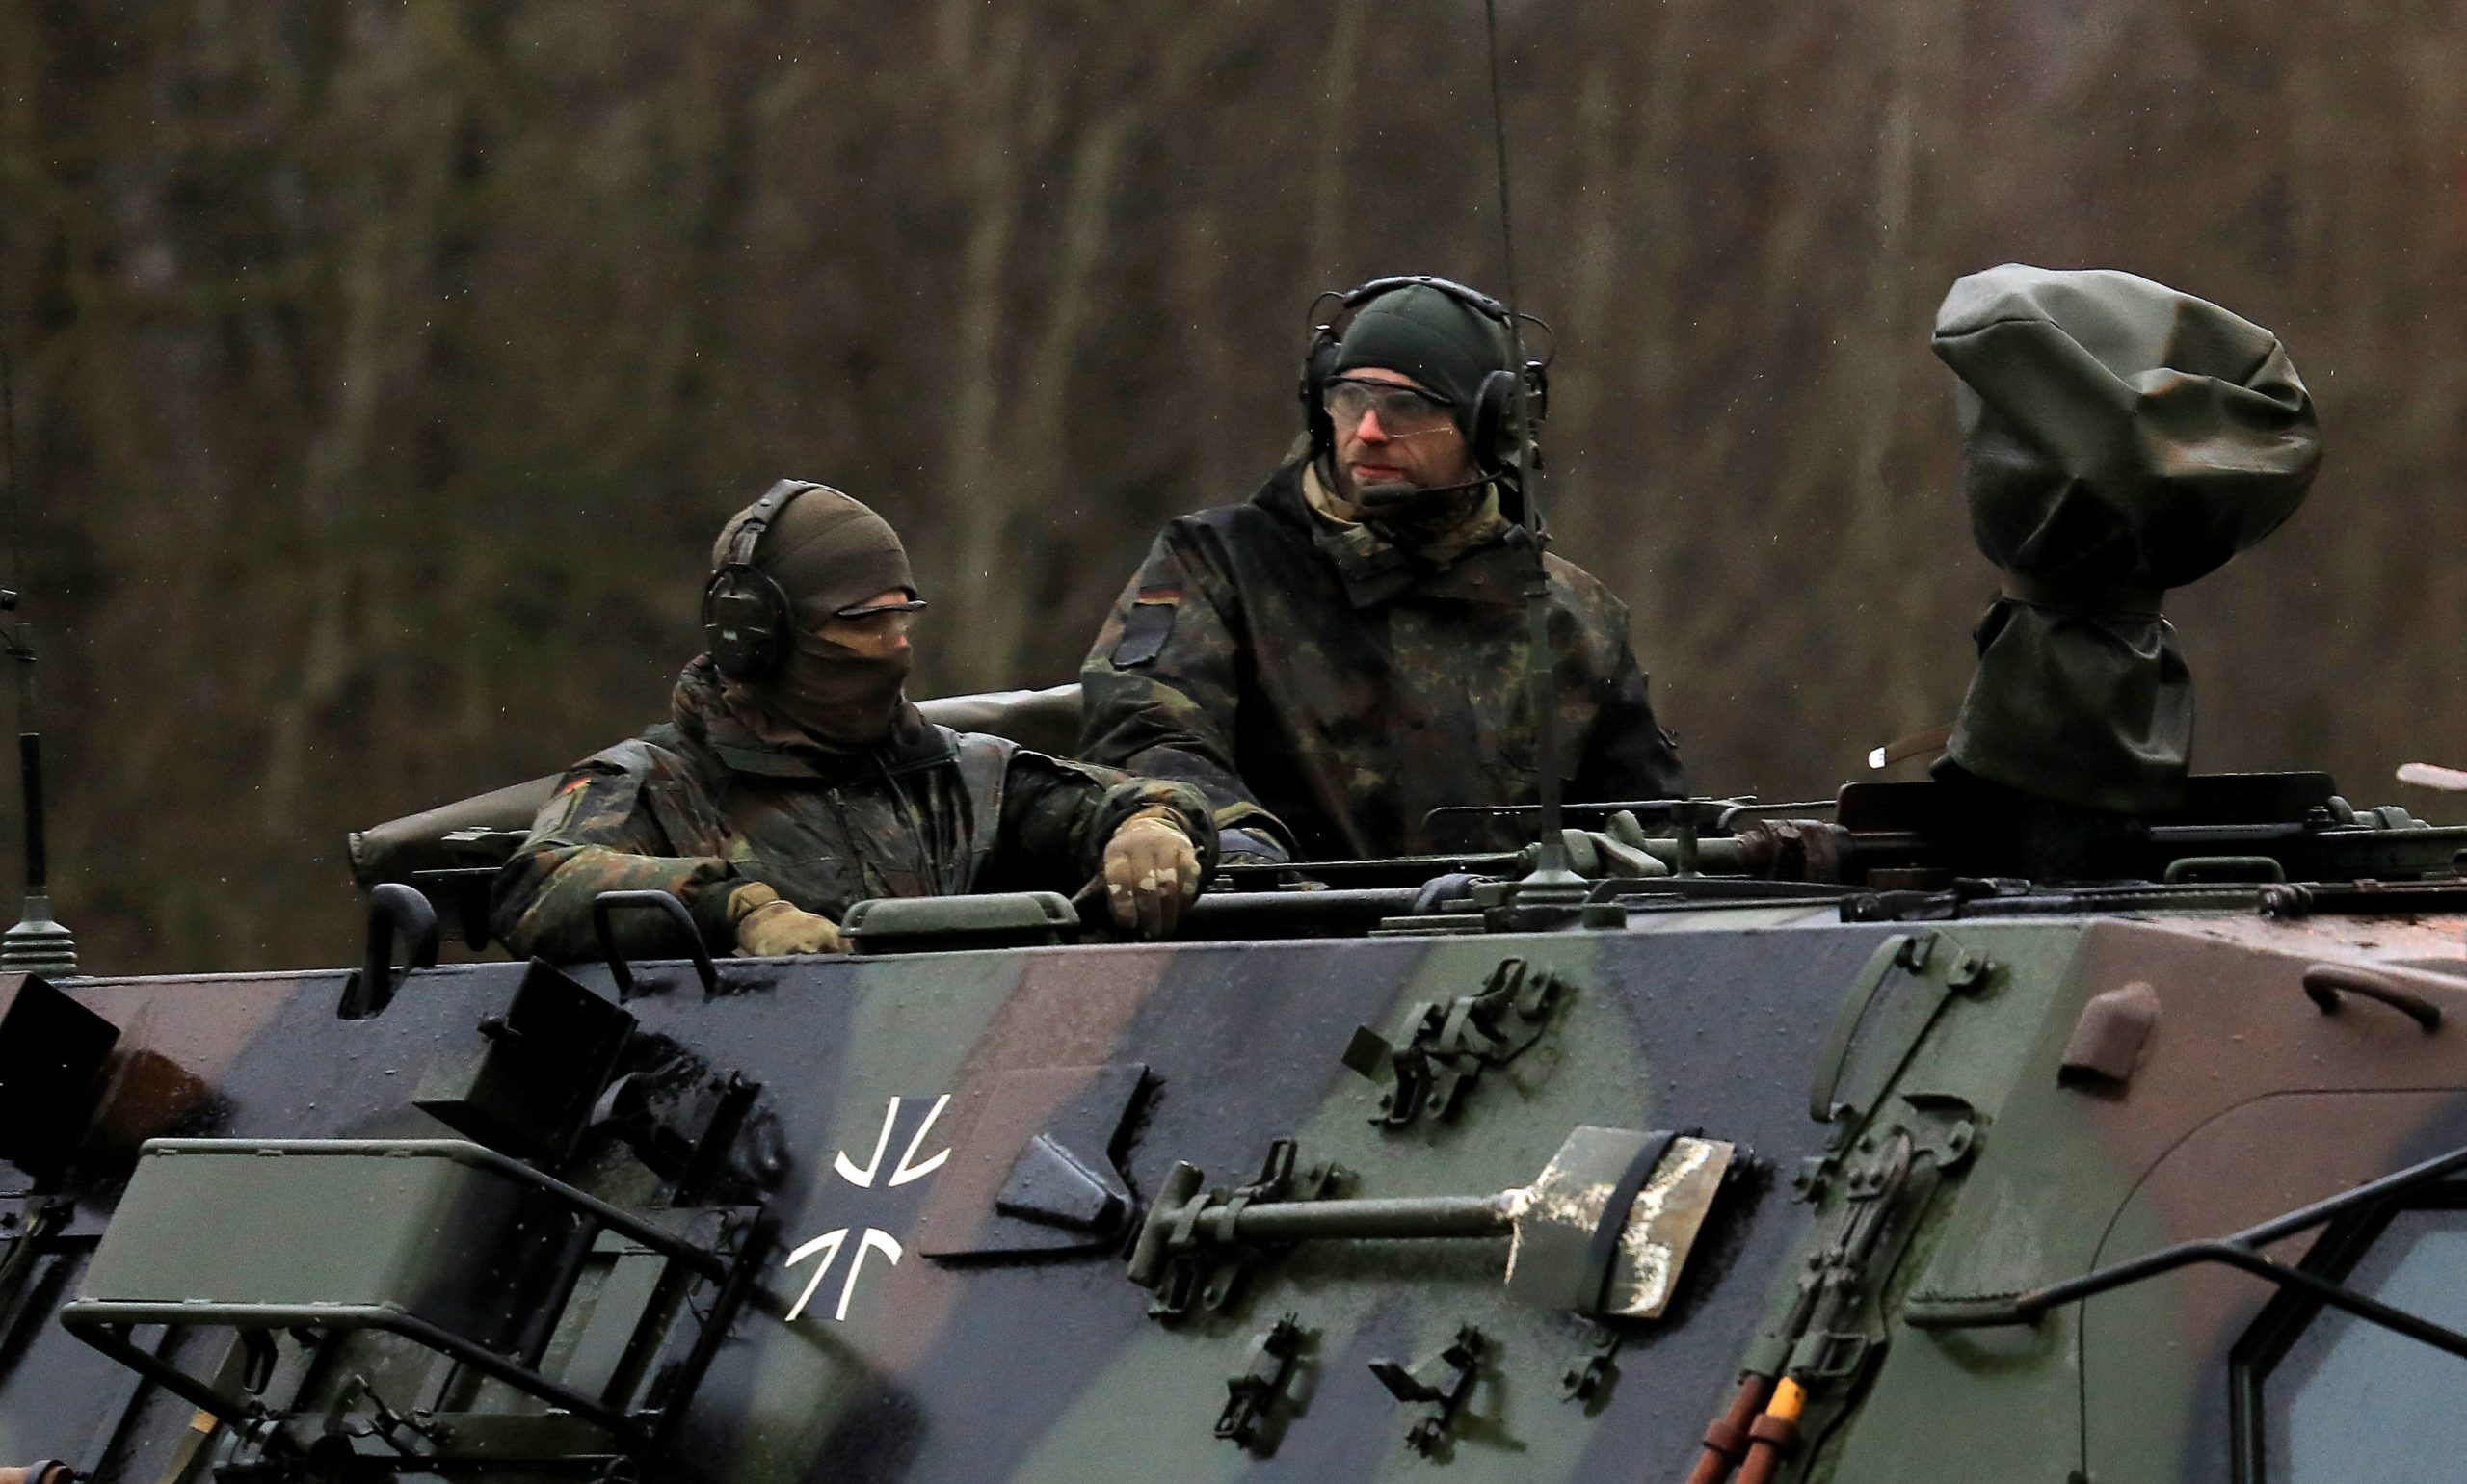 Baltic states in Europe fear Putin has them in his sights